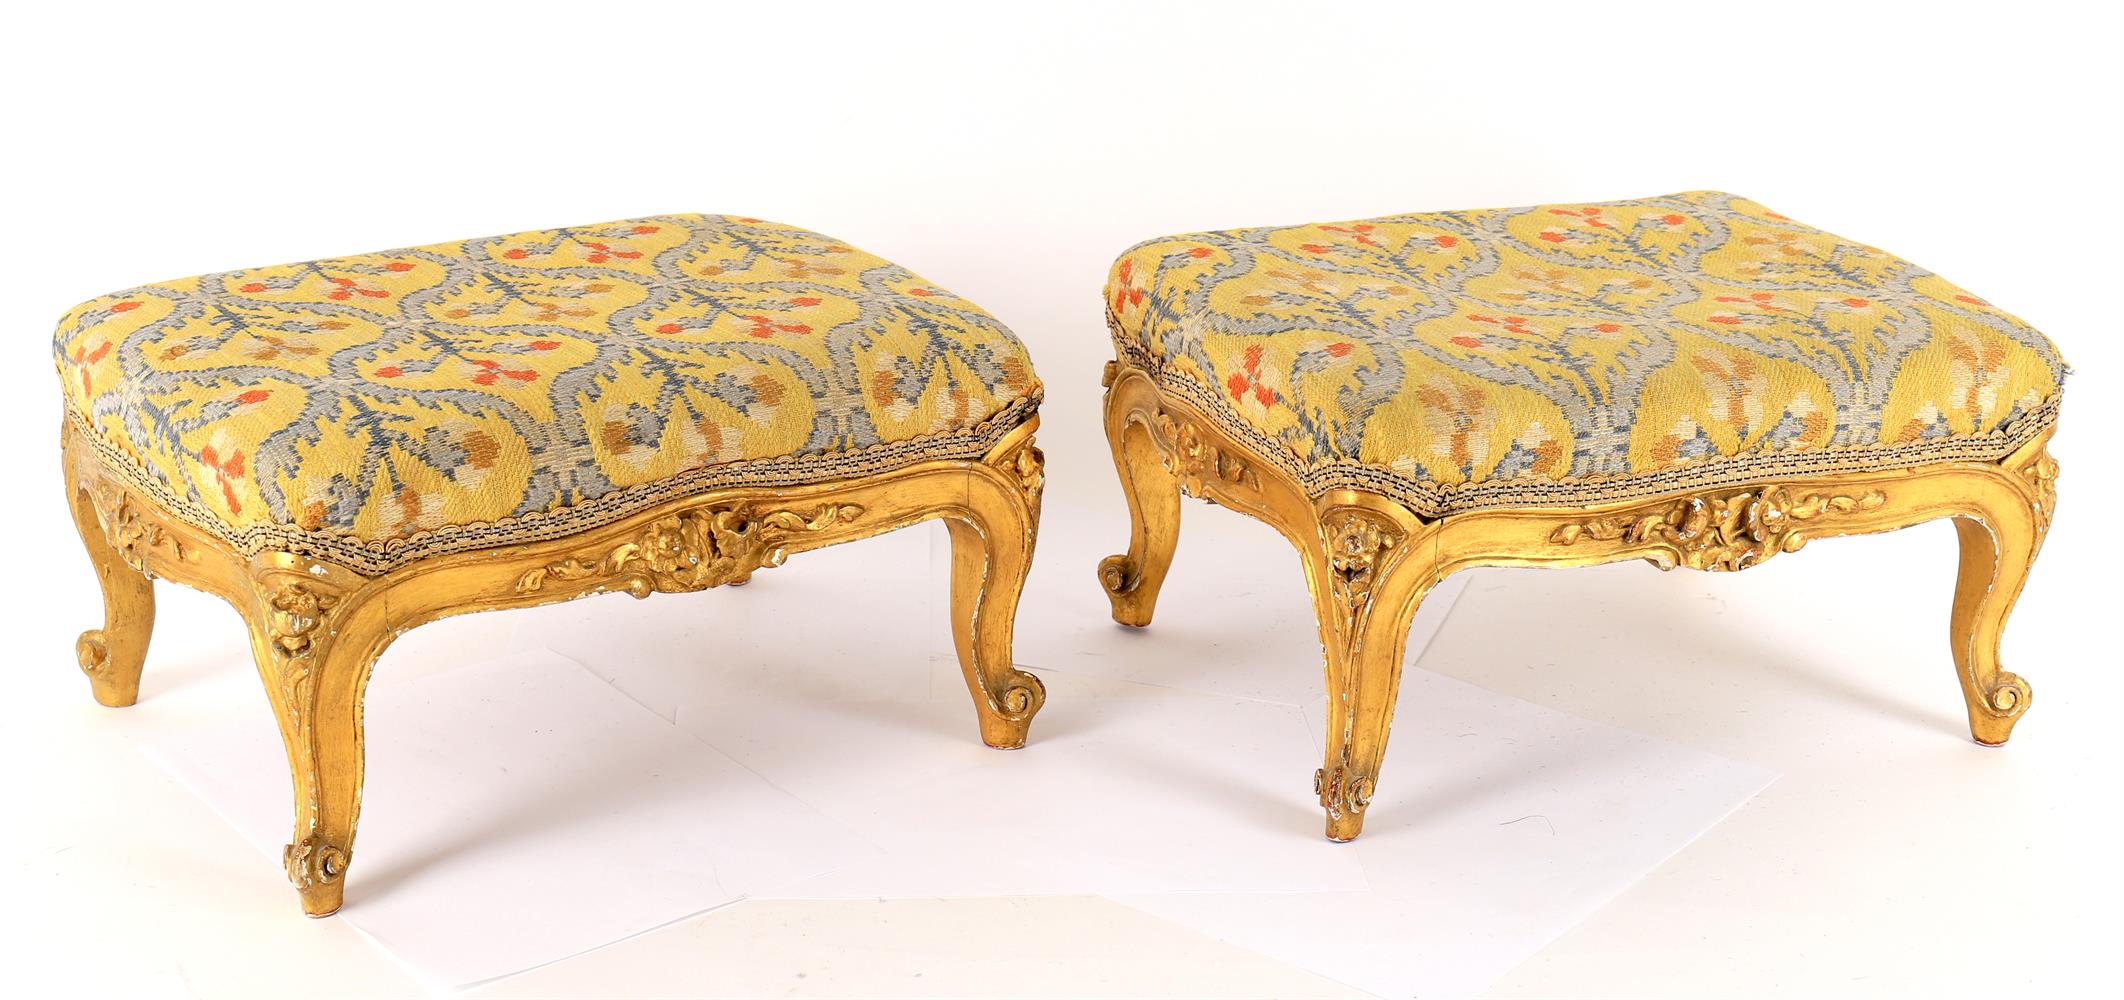 A pair of early Victorian giltwood footstools - Image 2 of 4